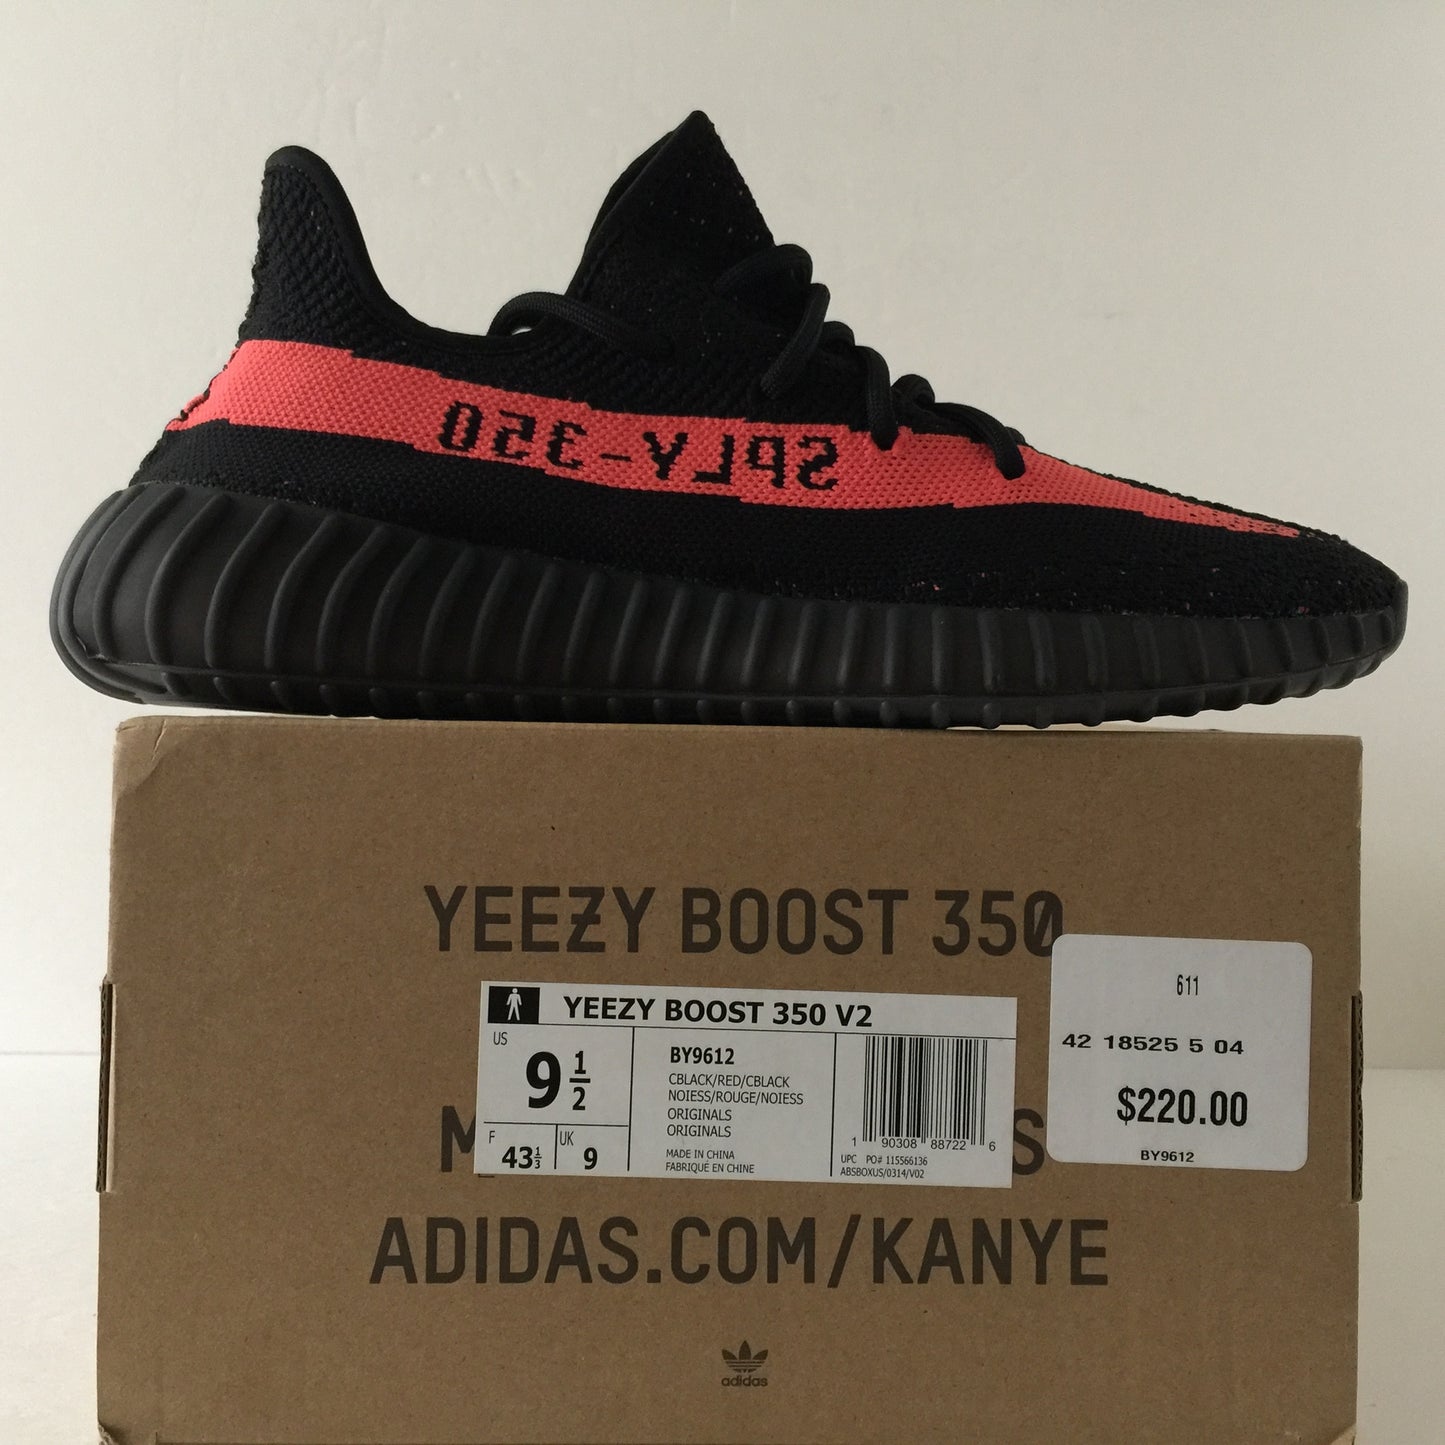 DS Adidas Yeezy Boost 350 V2 Solar Red Size 9.5 - DOPEFOOT
 - 2